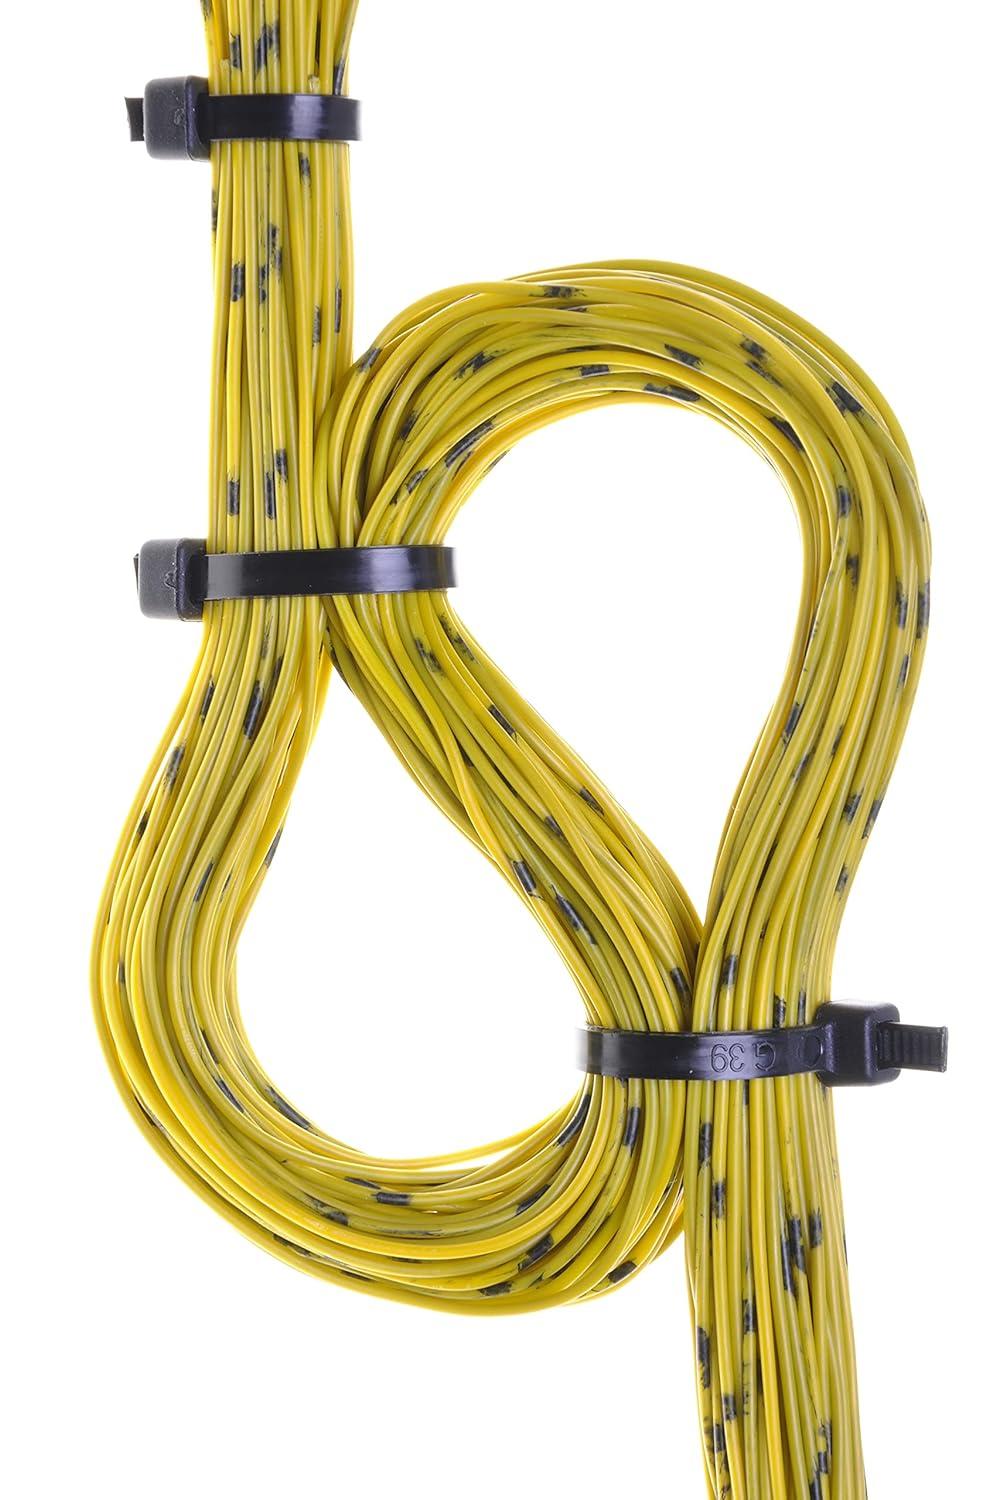 8 Gold Metallic Cable Ties